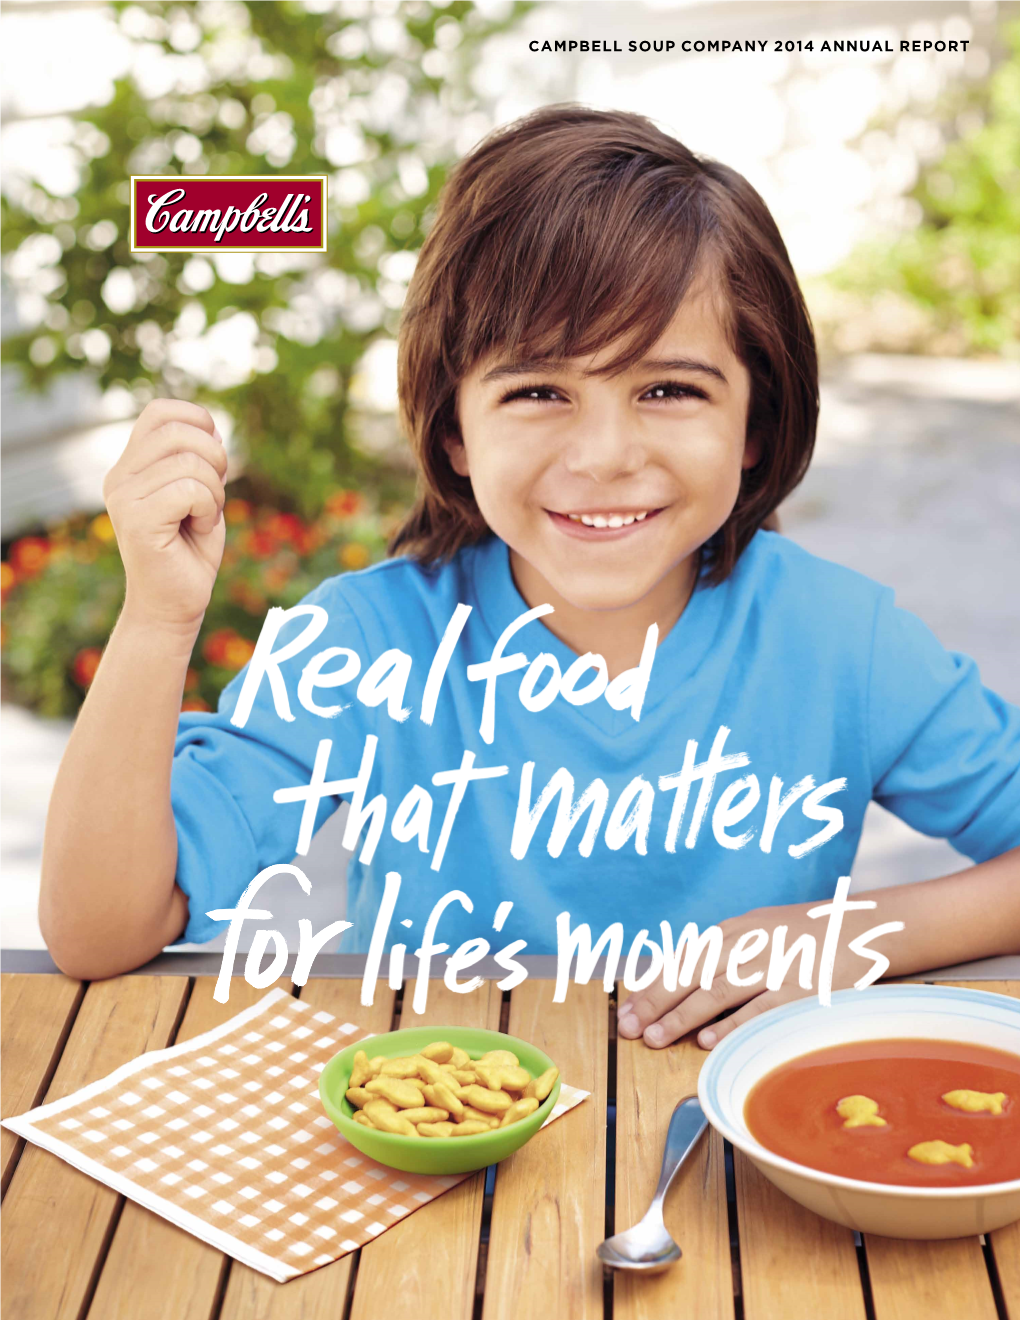 Reports Campbell Soup Company 2014 Annual Report